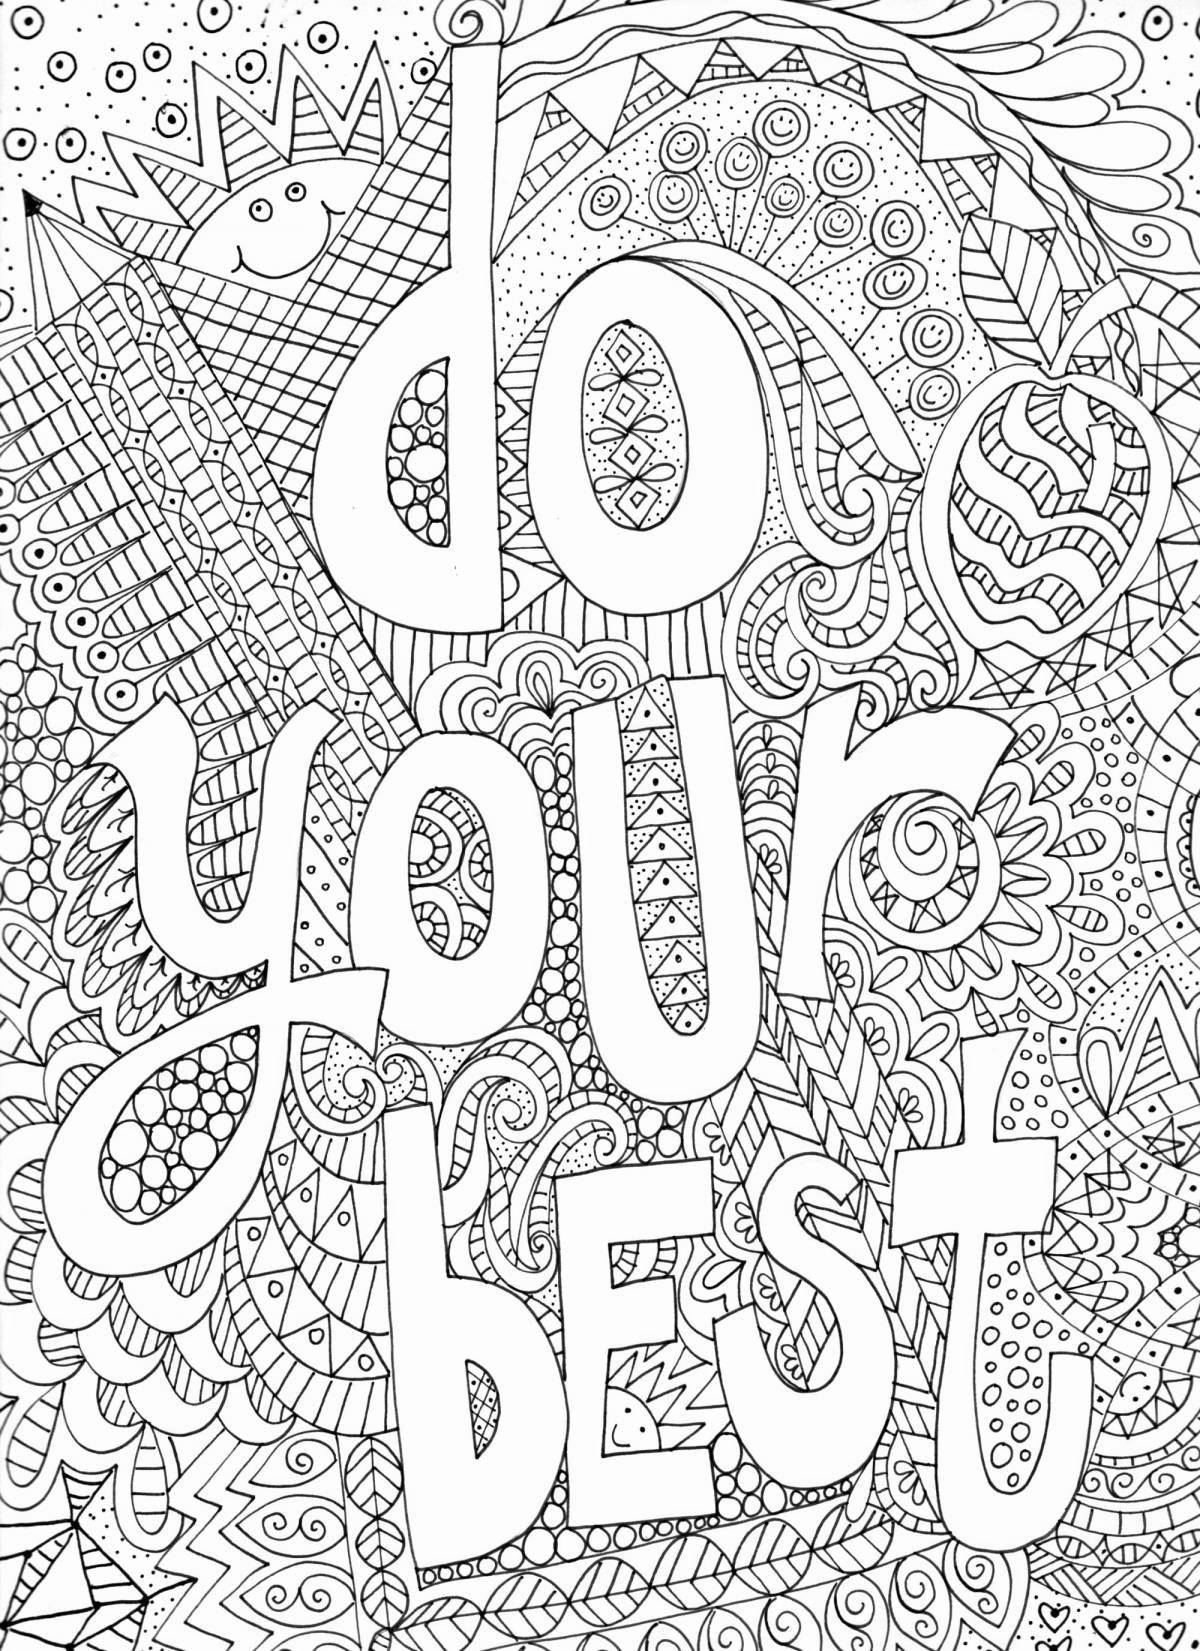 Bold coloring page motivation